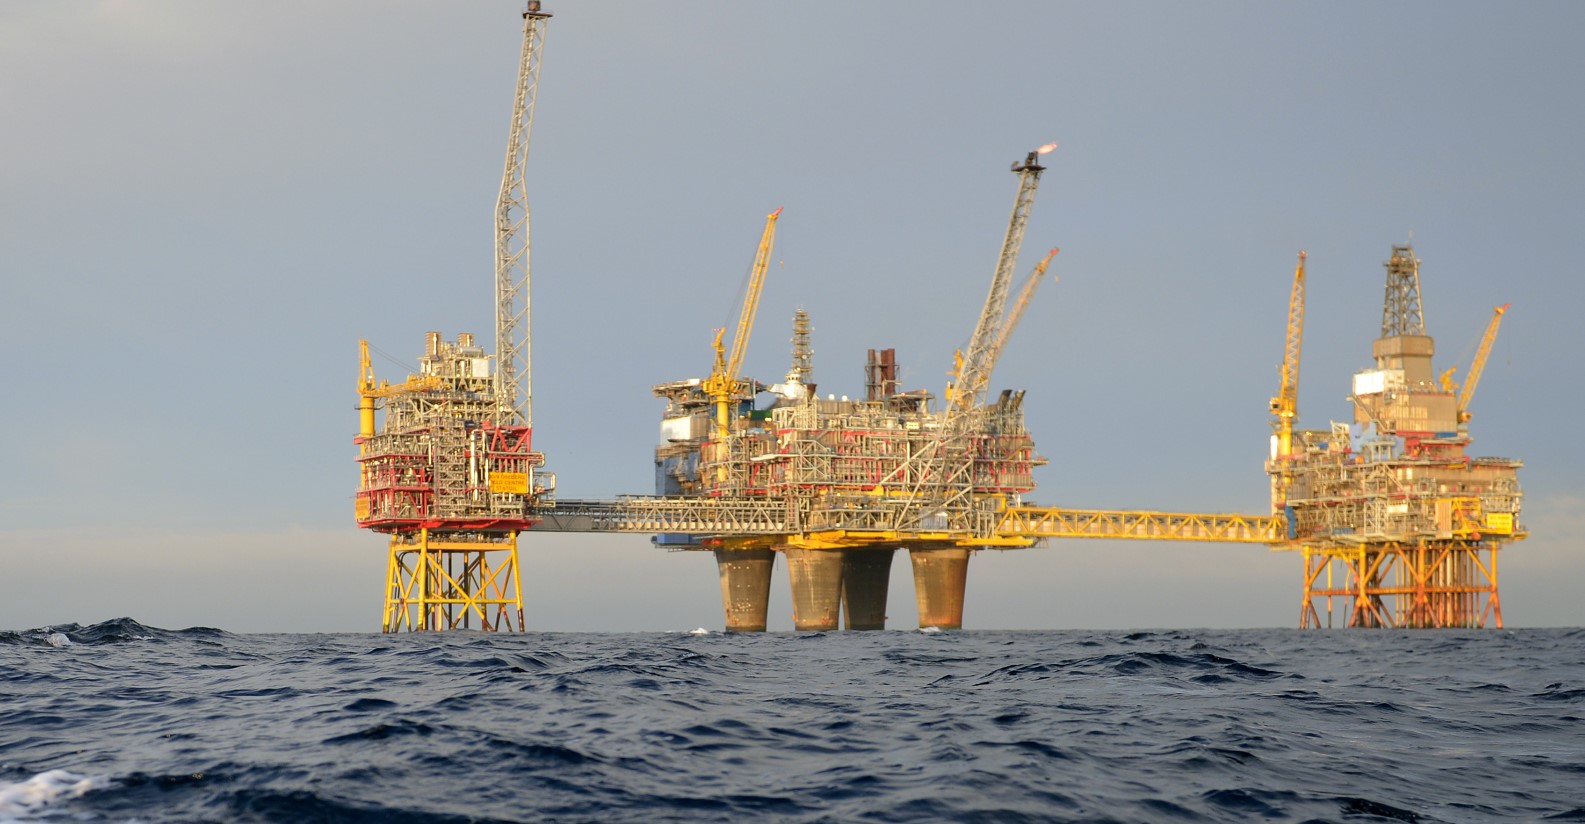 Wage ends oil - Offshore Energy